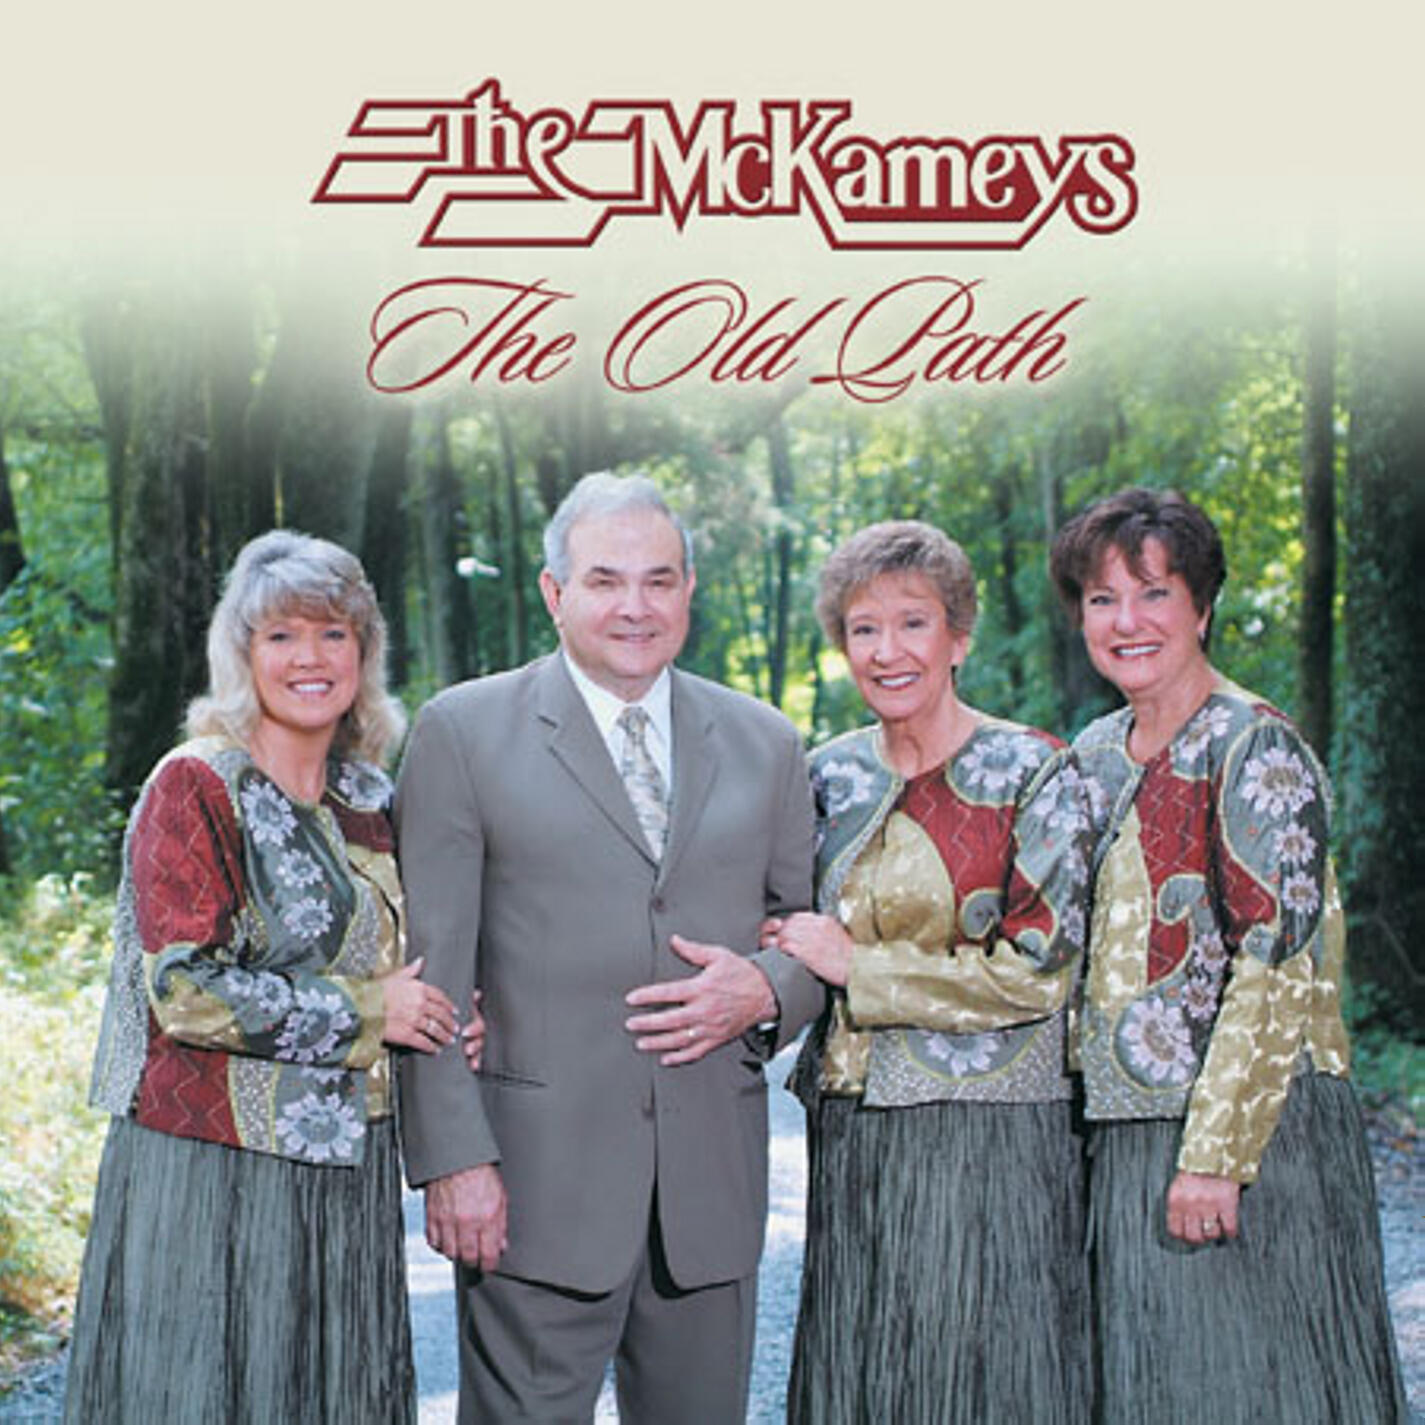 The McKameys The Old Path iHeart